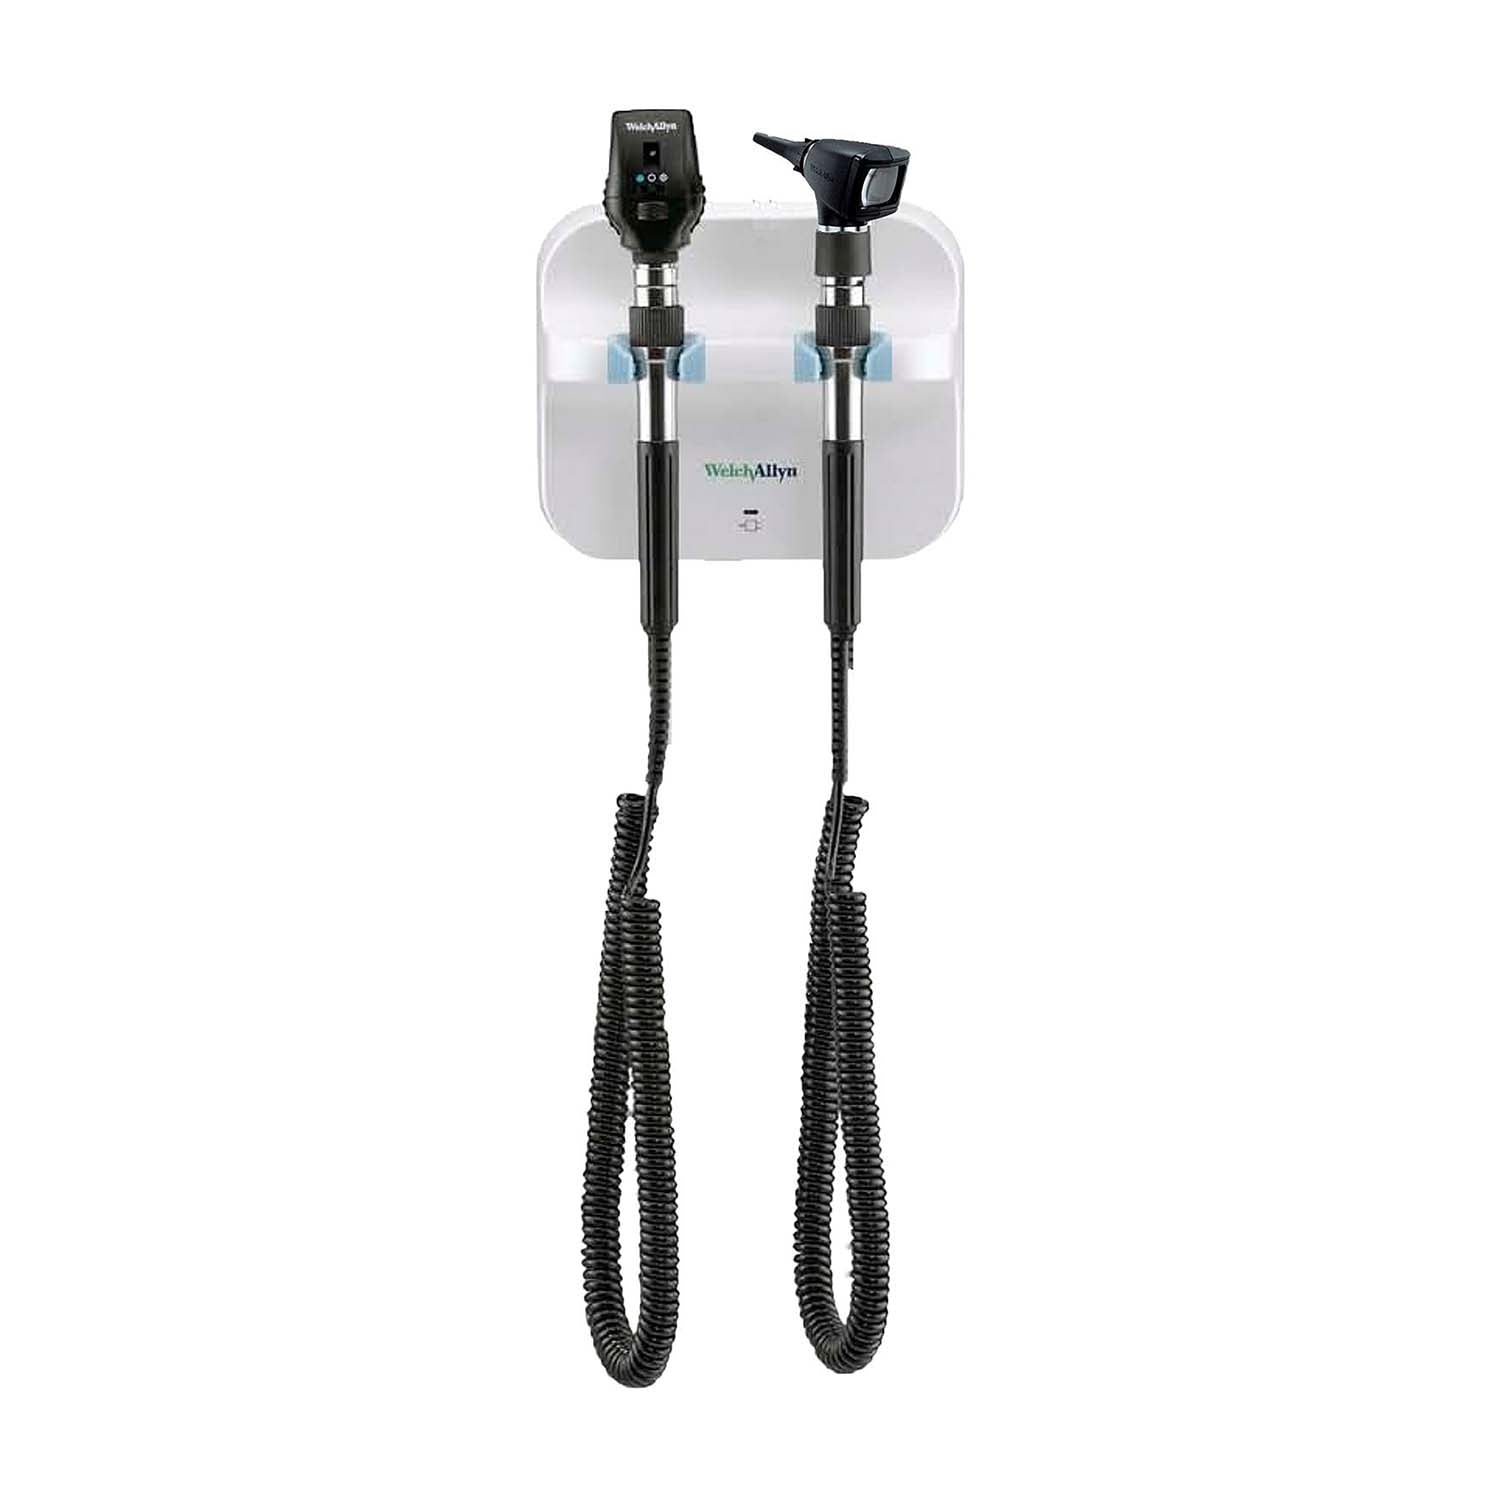 Welch Allyn GS777 Wall Transformer with Ophthalmoscope & Otoscope UK